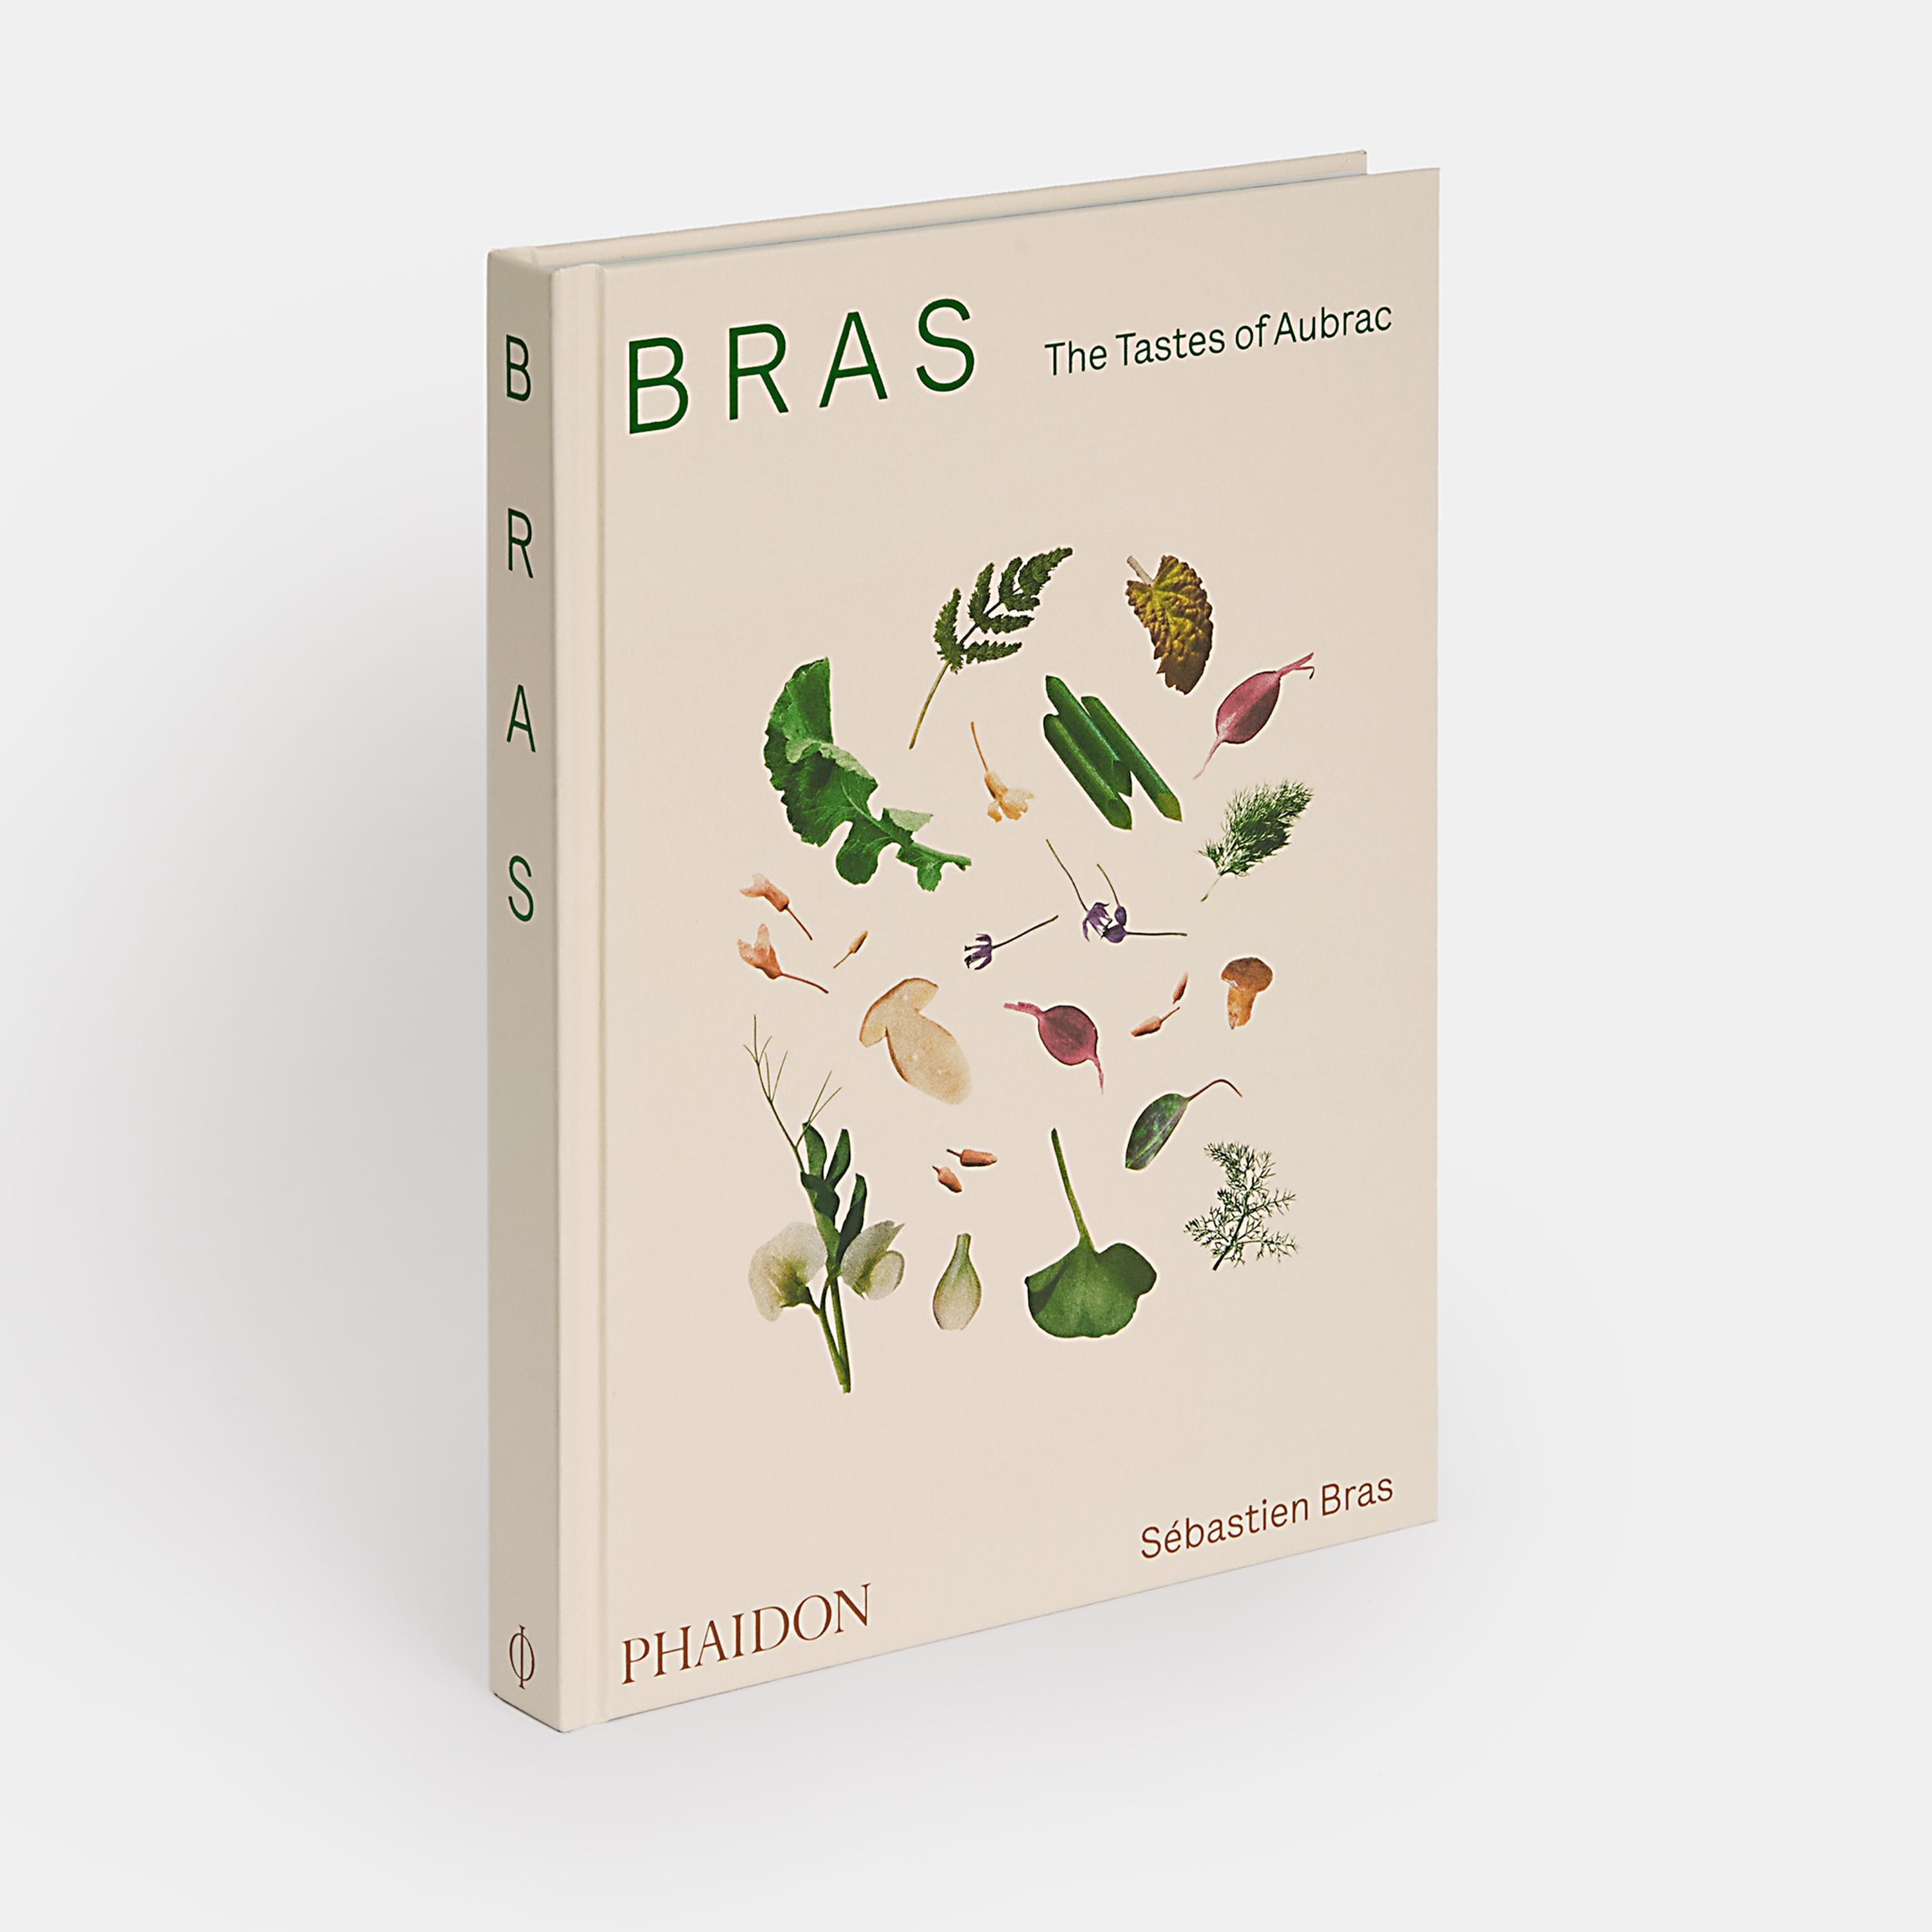 The story behind one of the most influential restaurants in the world, situated in the picturesque Aubrac region of France.

With this long-awaited book, Sébastien Bras, son of legendary French chef Michel Bras, invites us through the doors of Le